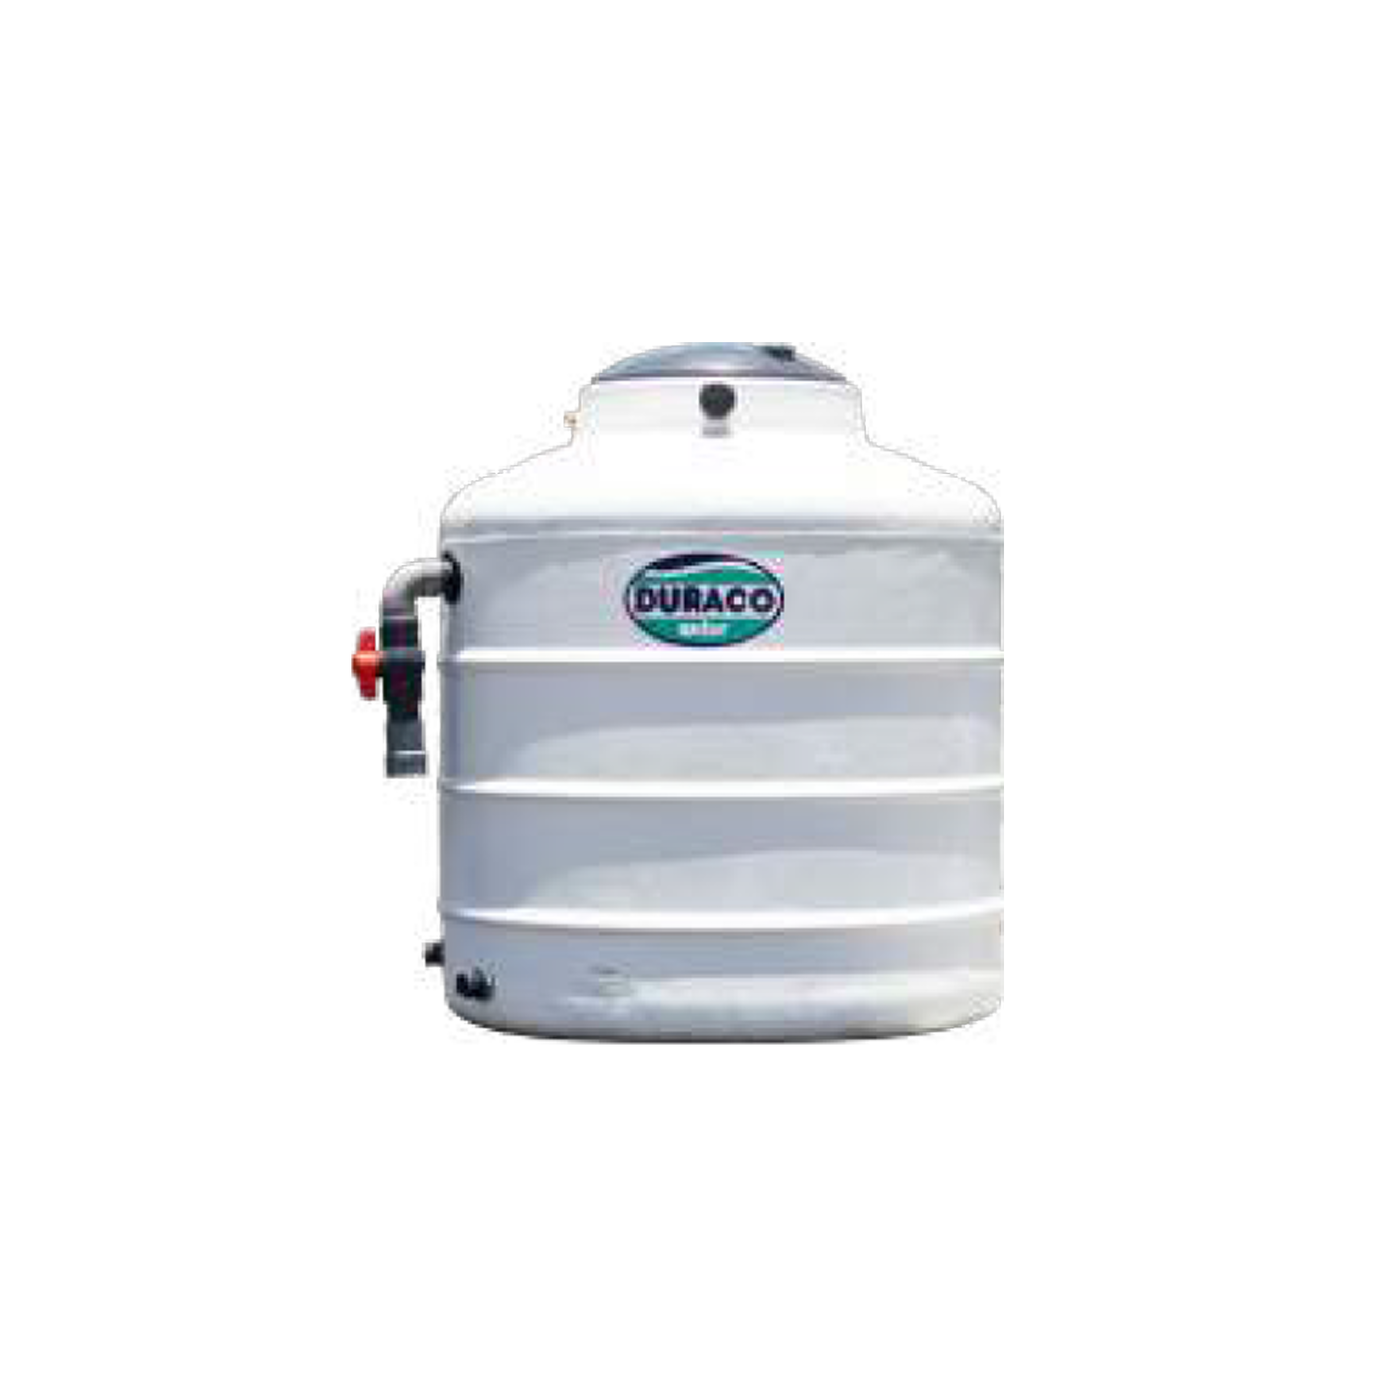 Duraco Self-Cleaning Water Tank